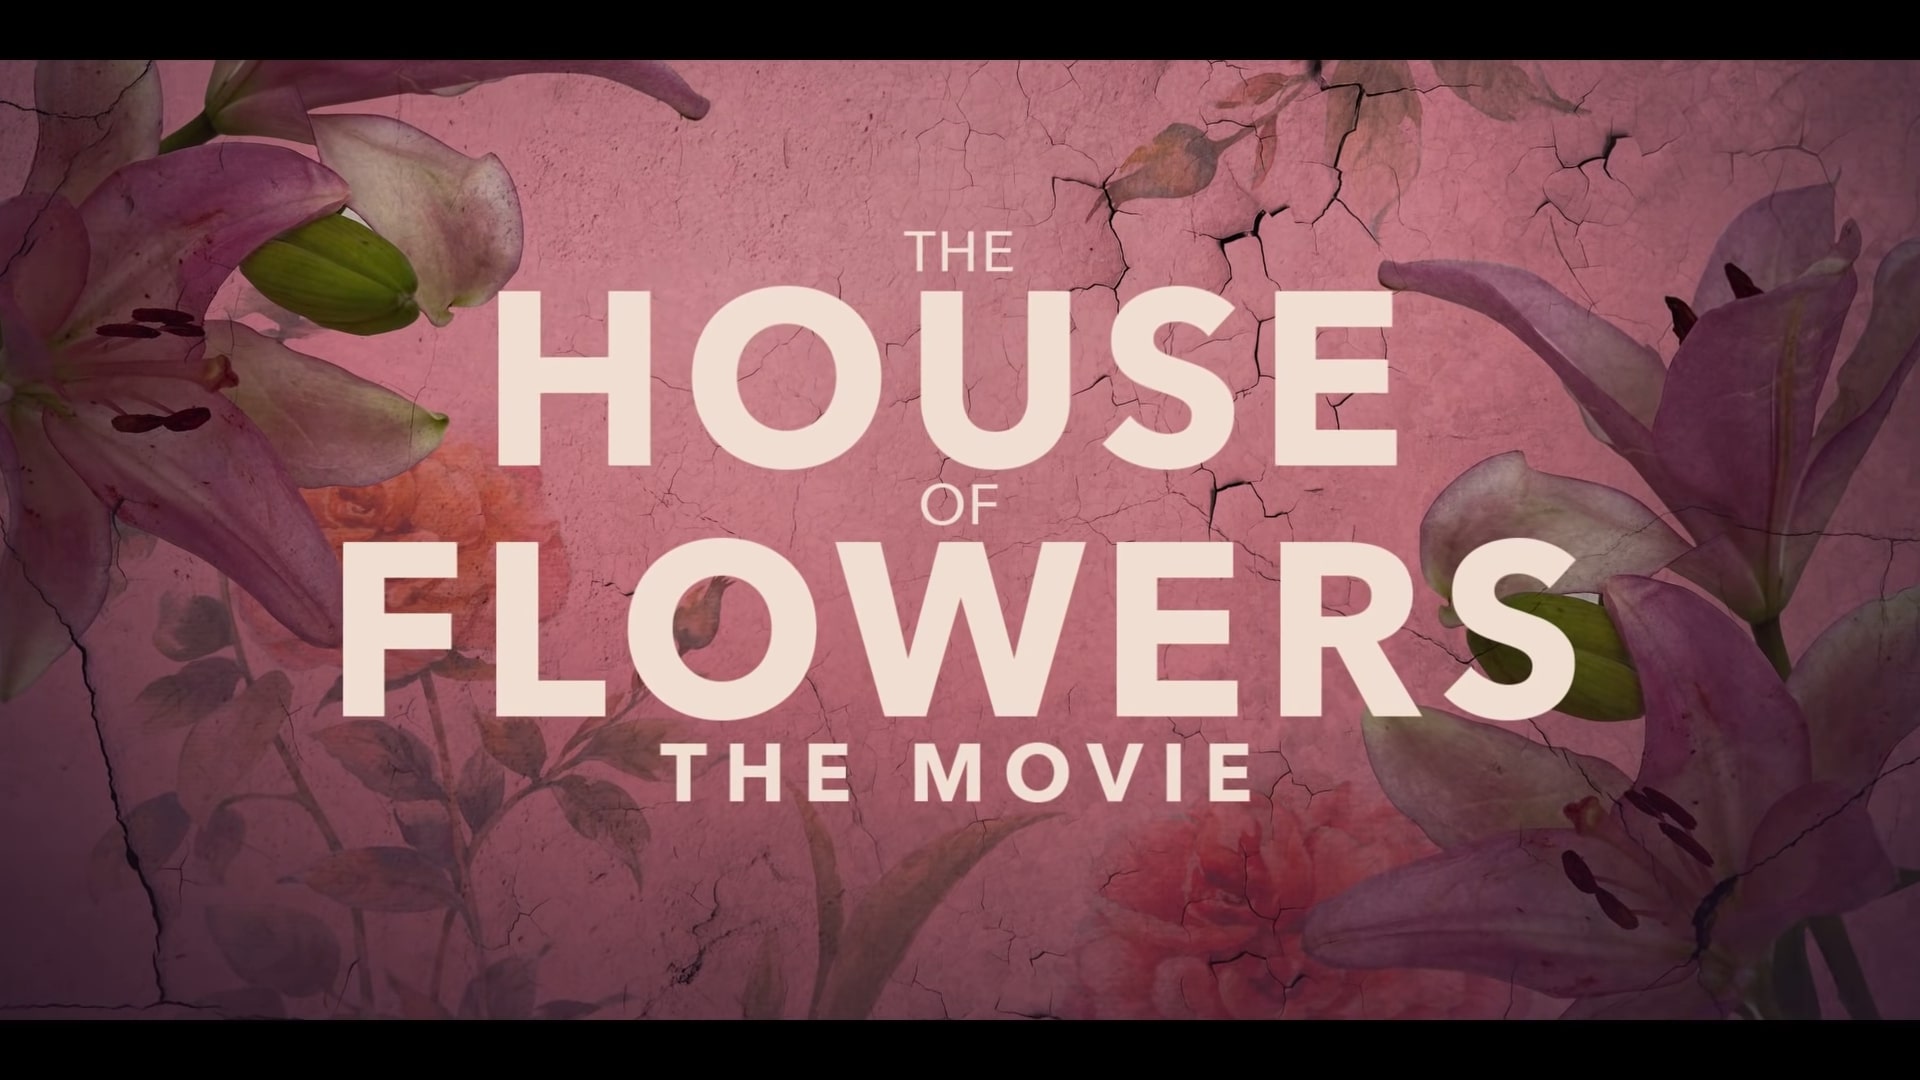 The House of Flowers, the Movie Netflix Trailer, Coming to Netflix in June 2021